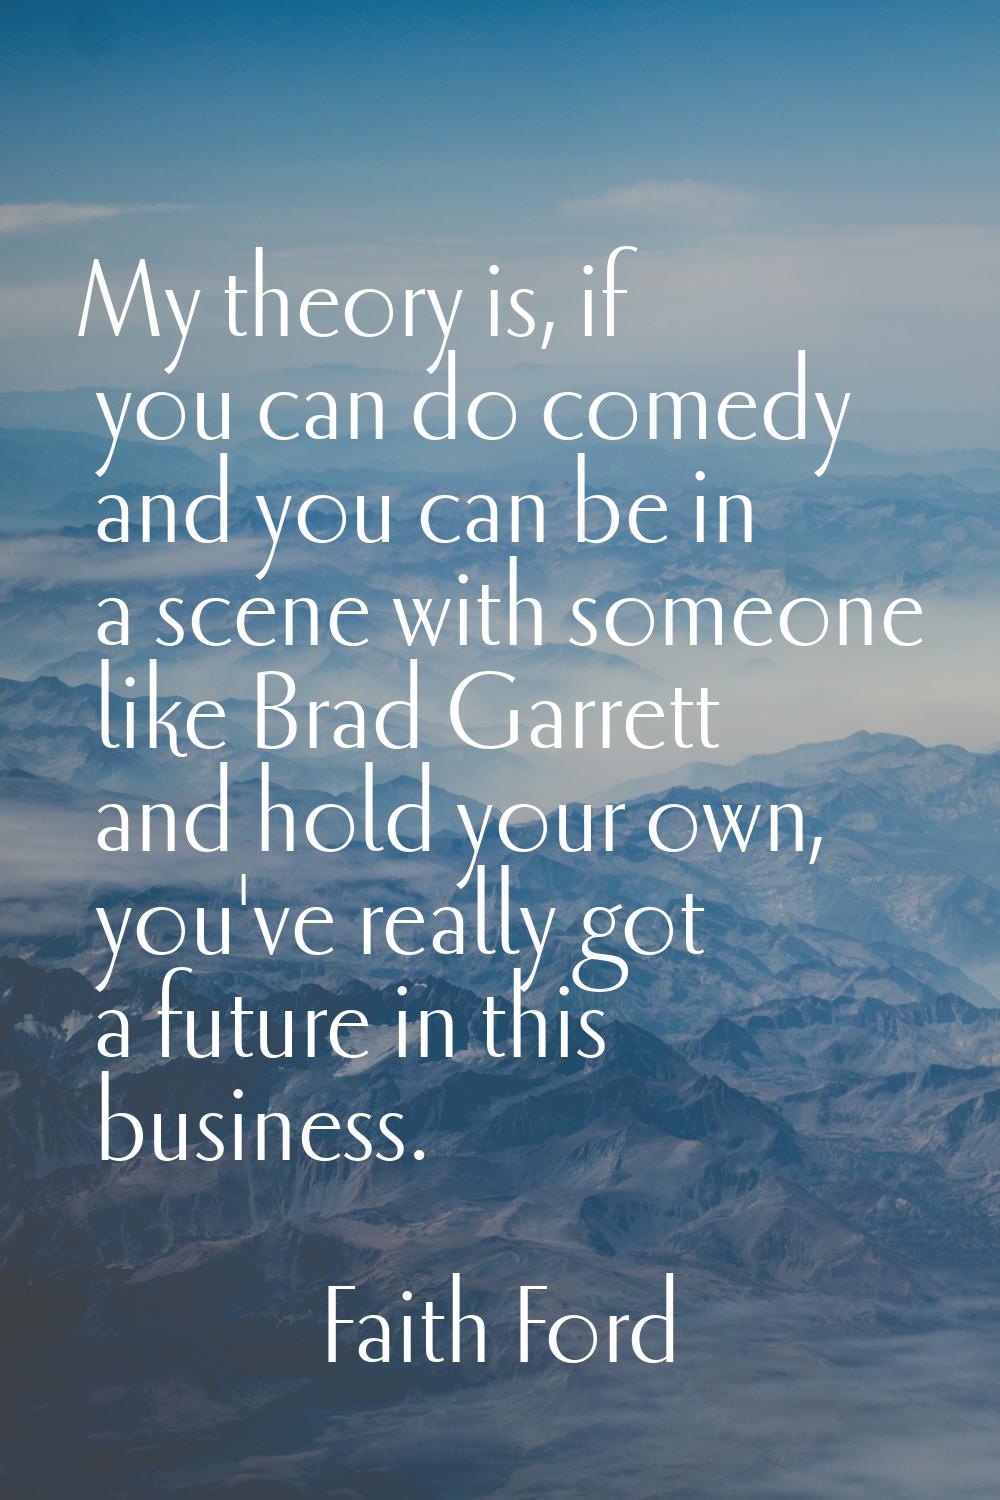 My theory is, if you can do comedy and you can be in a scene with someone like Brad Garrett and hol